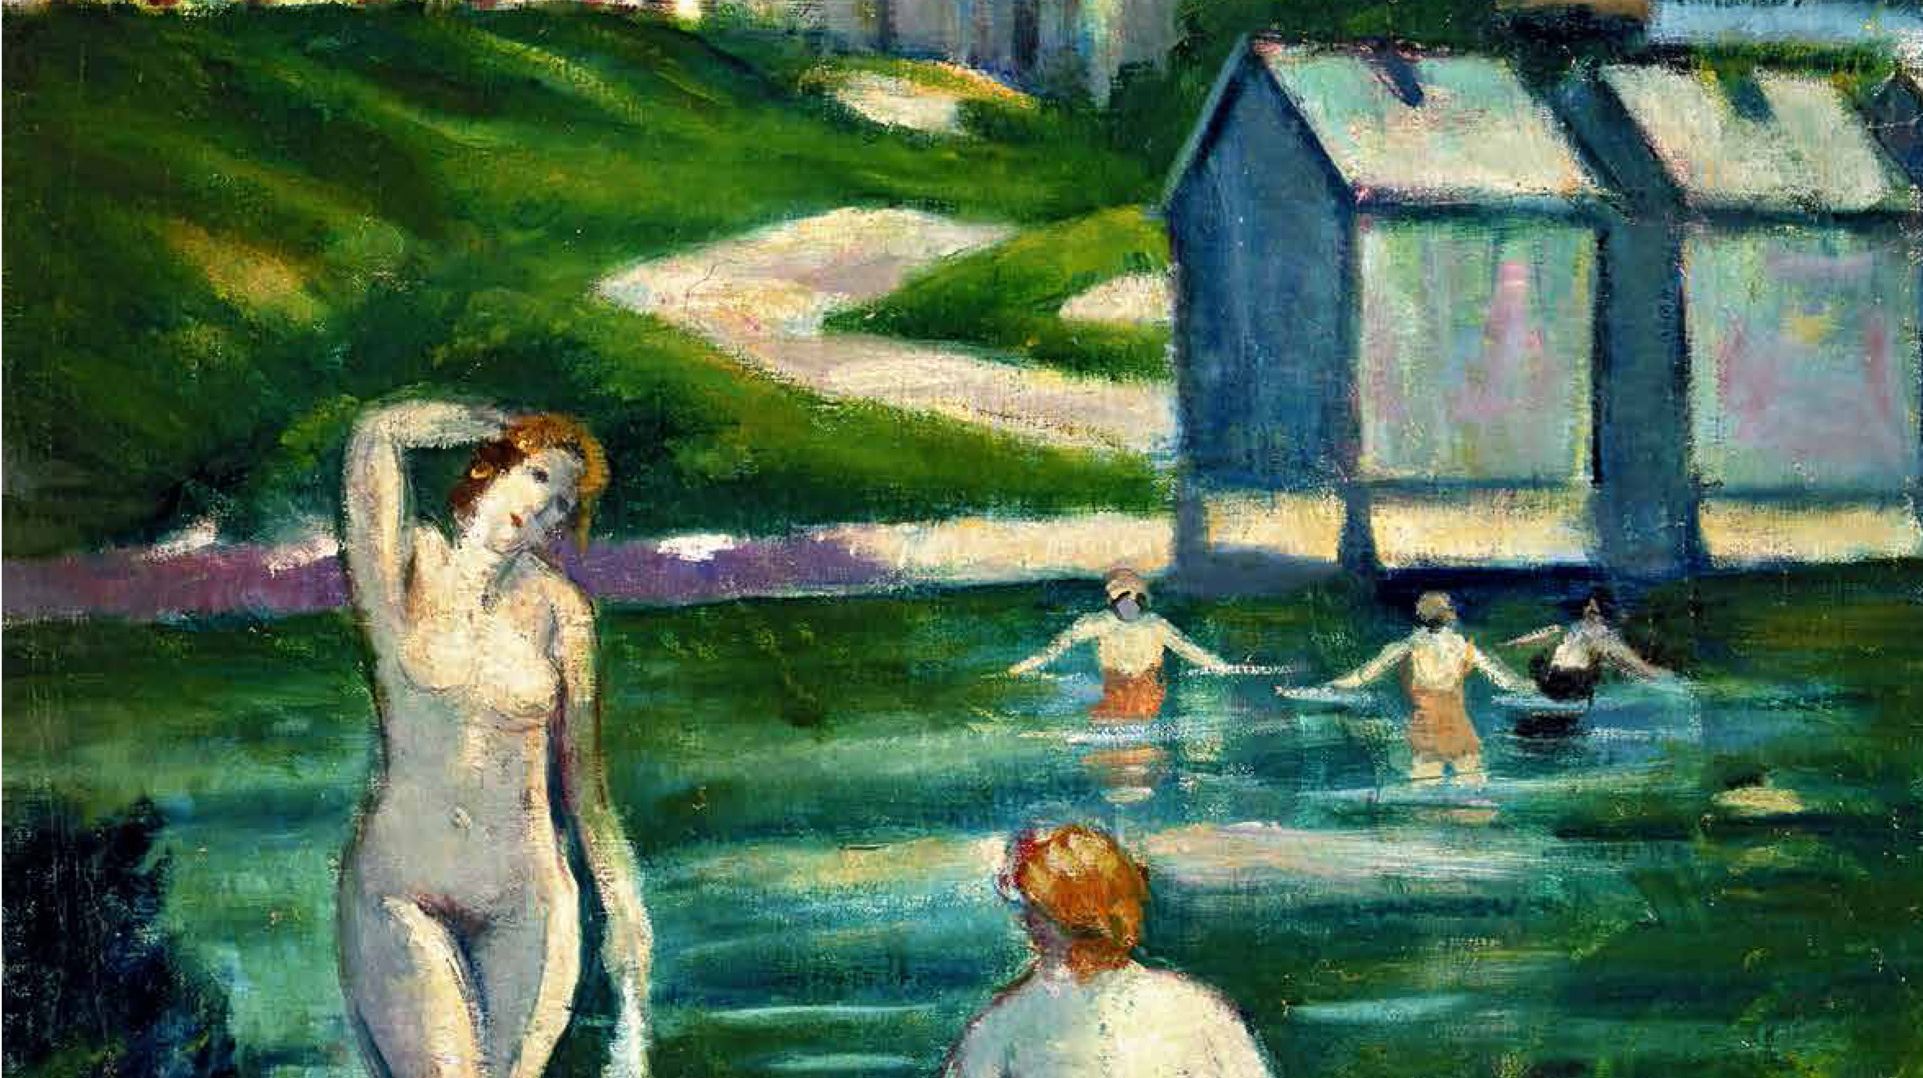 Painting by August Kallert, River Amper swimming area